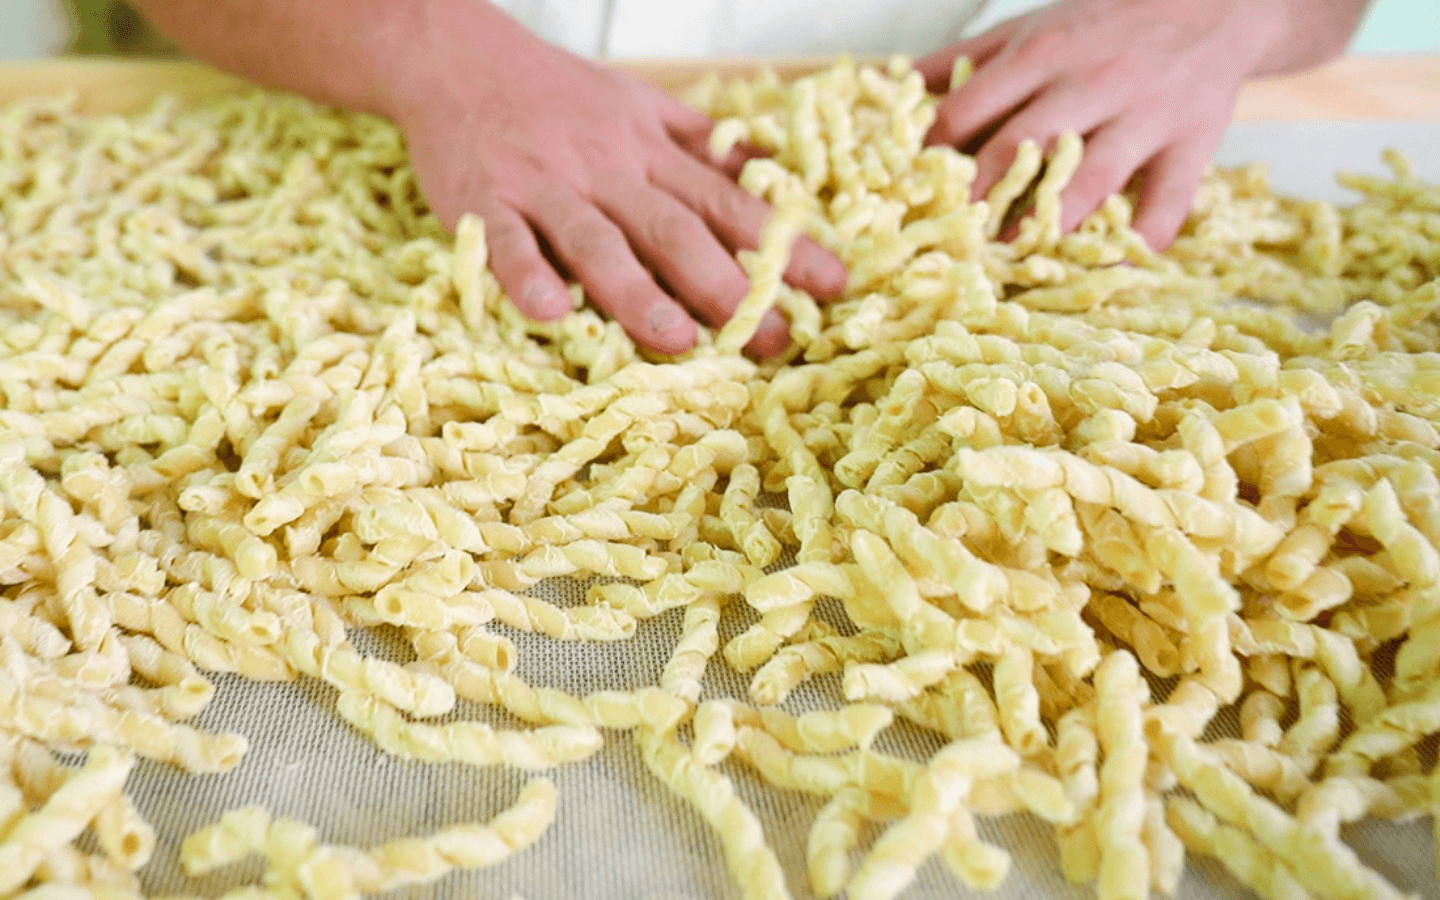 Introducing Our Amazing New Pasta!